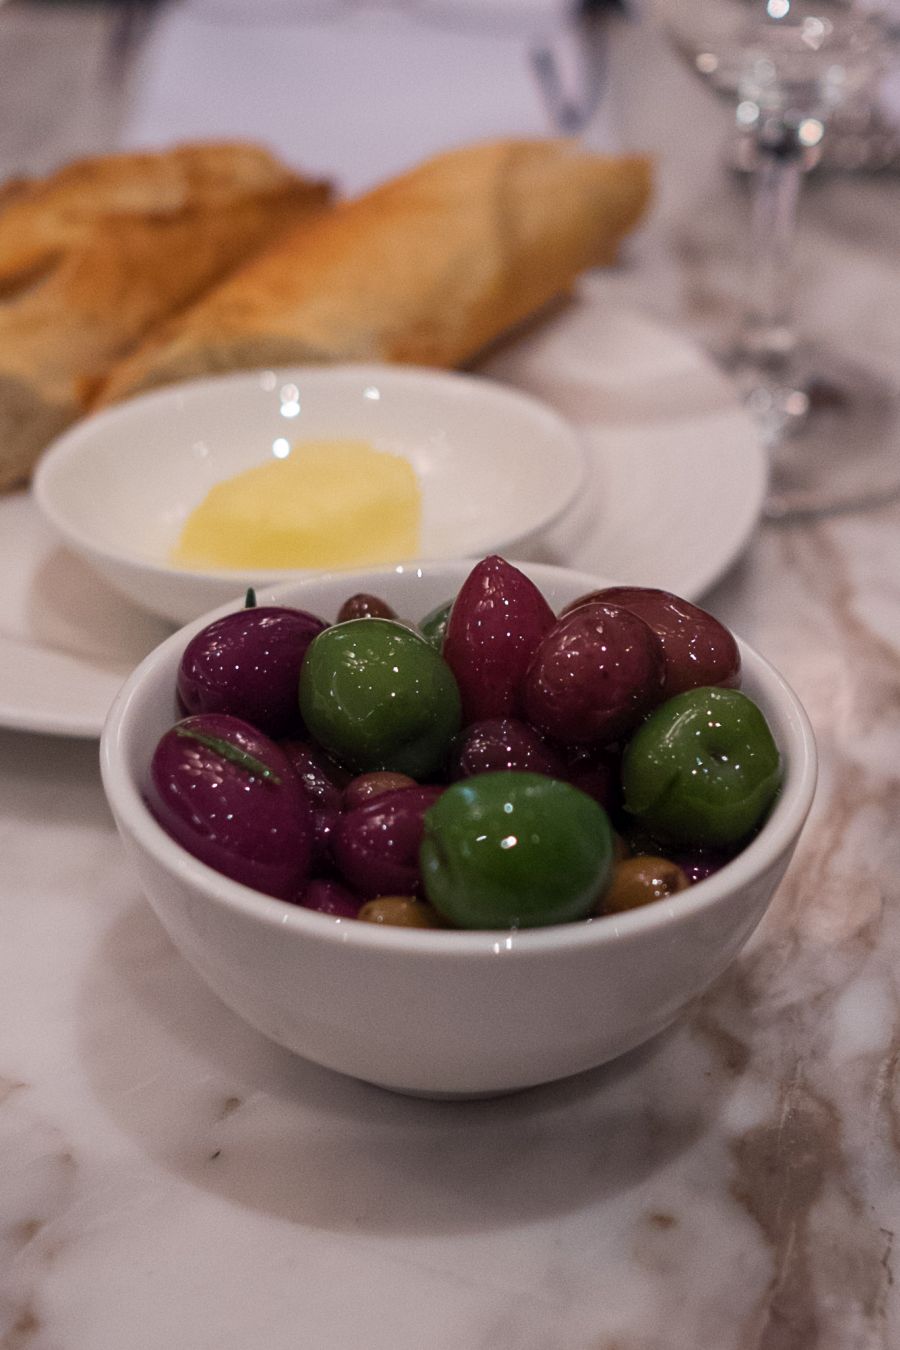 Wild olives in garlic and rosemary oil (AU$7.50)